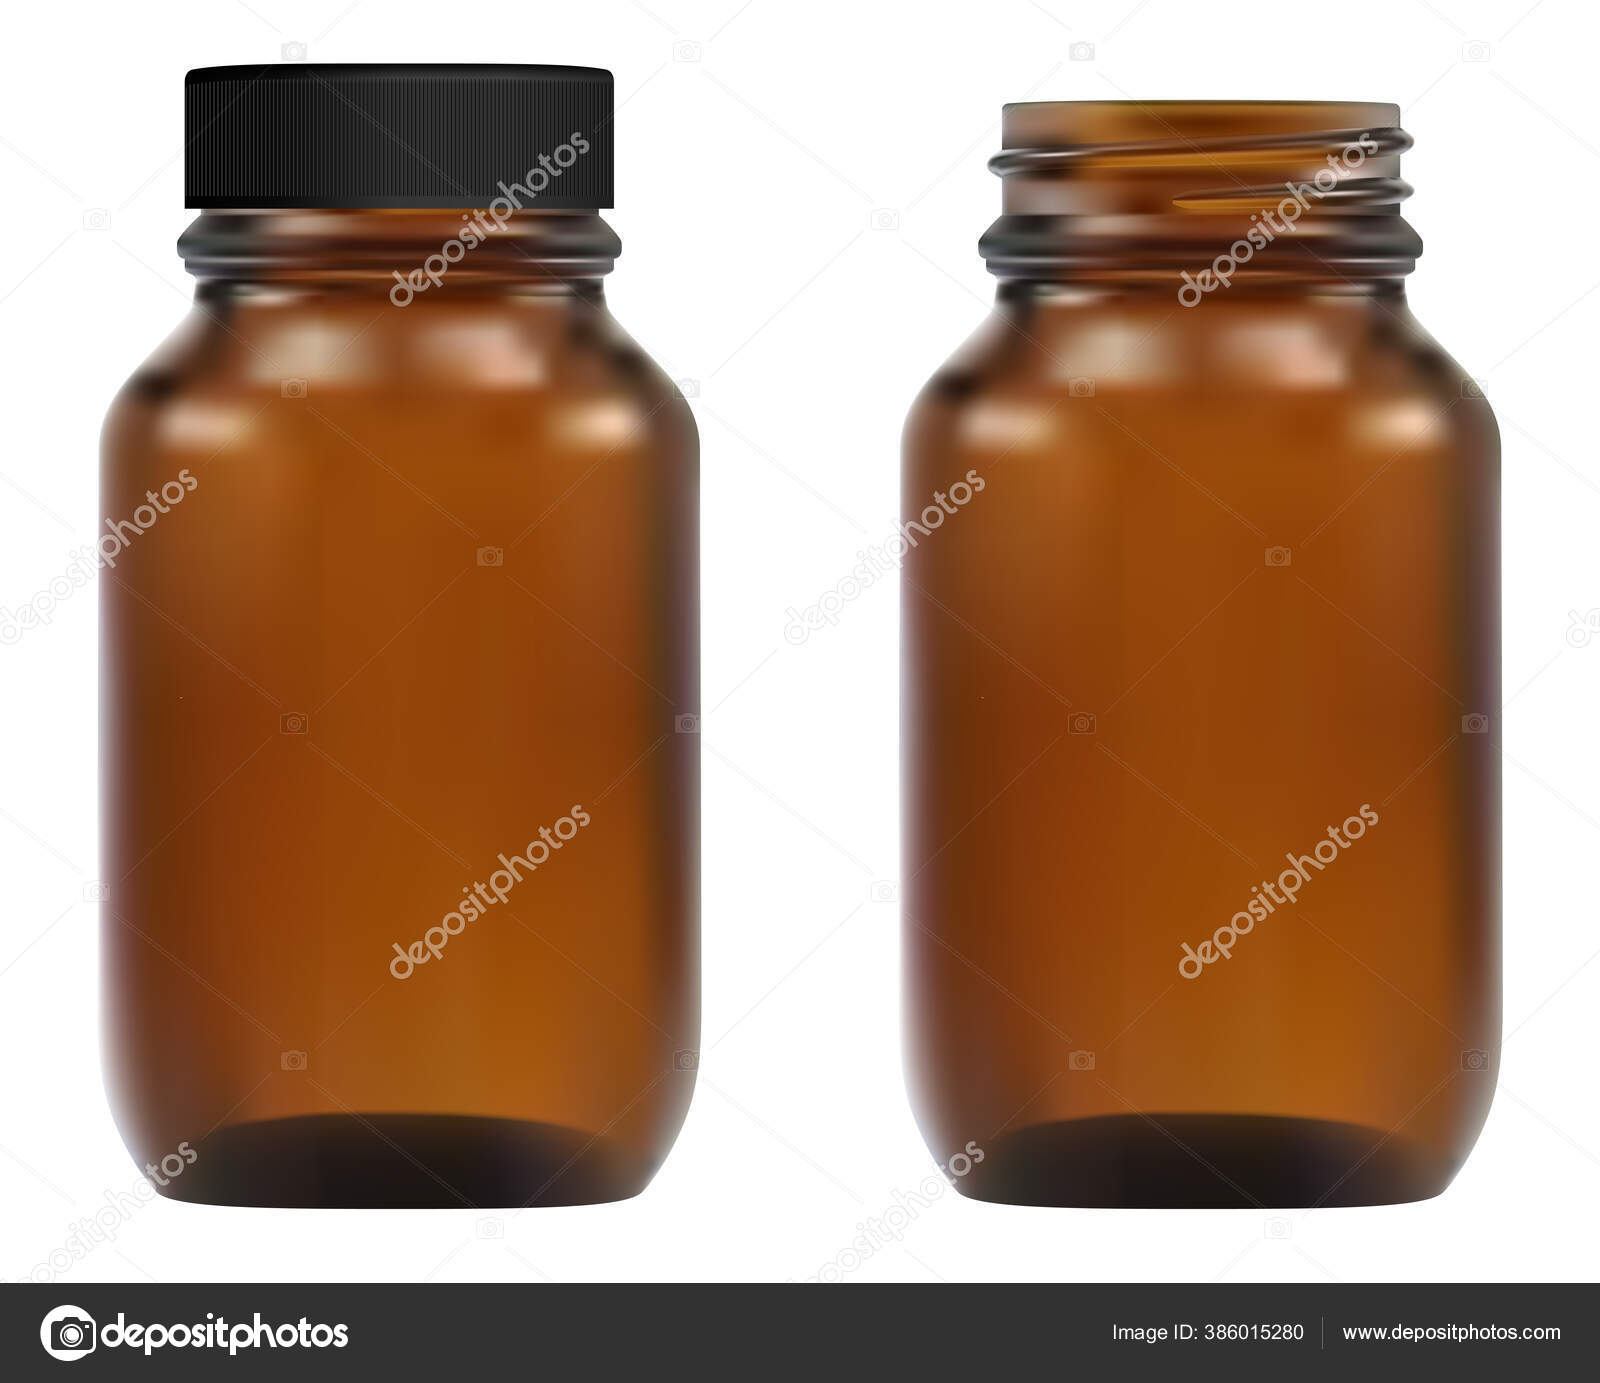 Download Brown Glass Medical Bottle Apothecary Container Illustration Pharmacy Pill Amber Vector Image By C Sergiibaibak Vector Stock 386015280